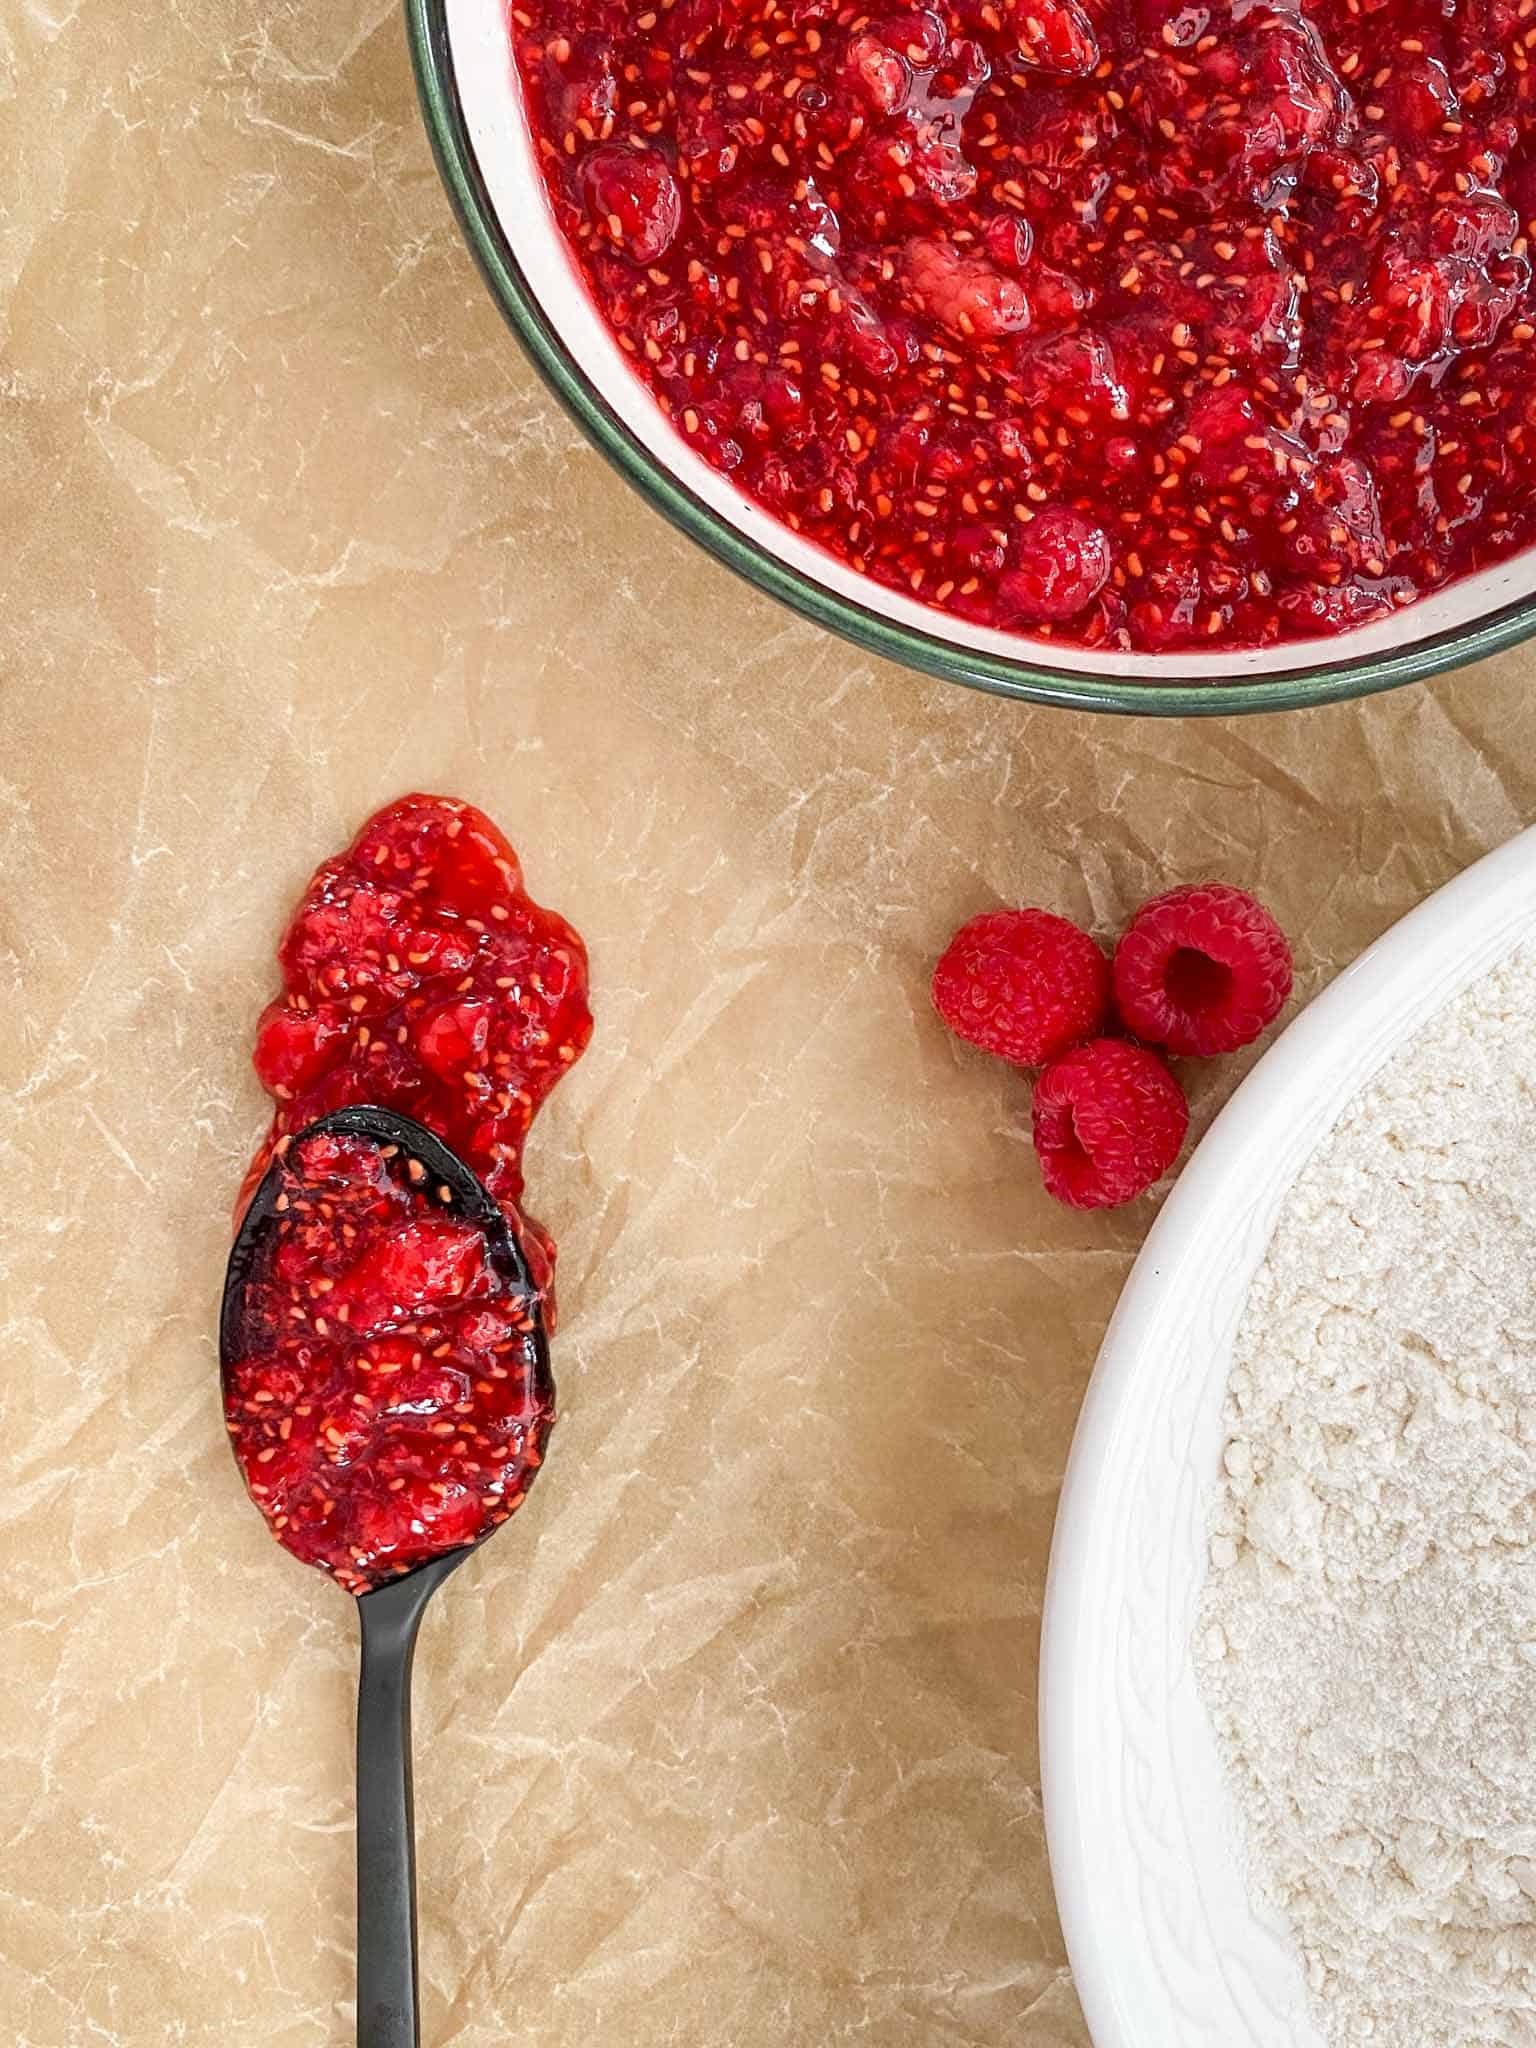 Red raspberry jam spilling off of a spoon in a large bowl.